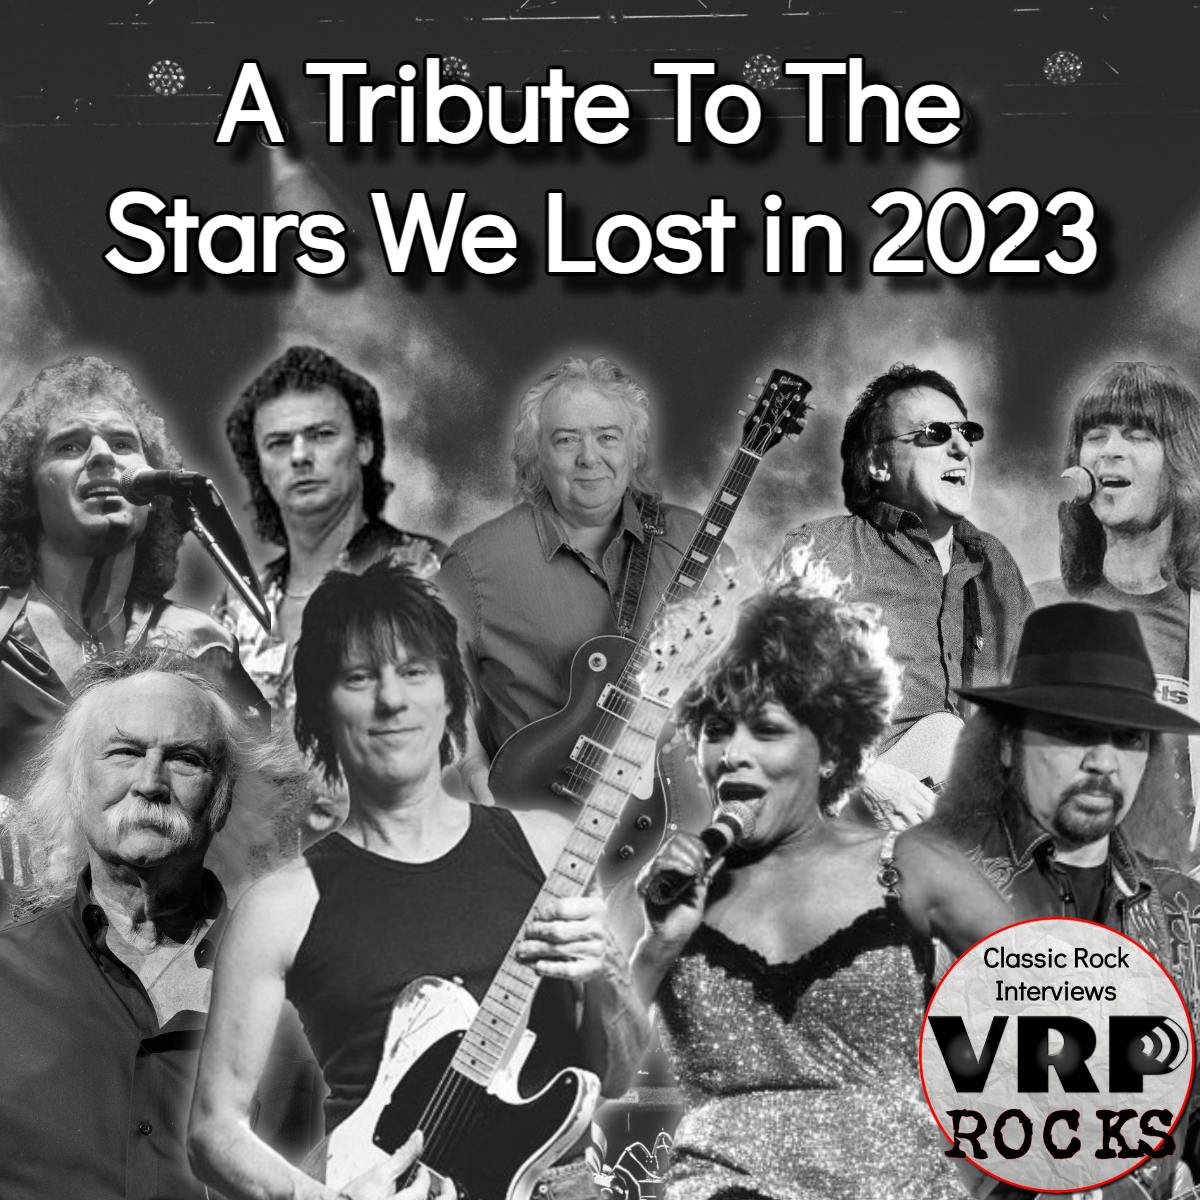 VRP Rocks - A Tribute To The Stars We Lost in 2023